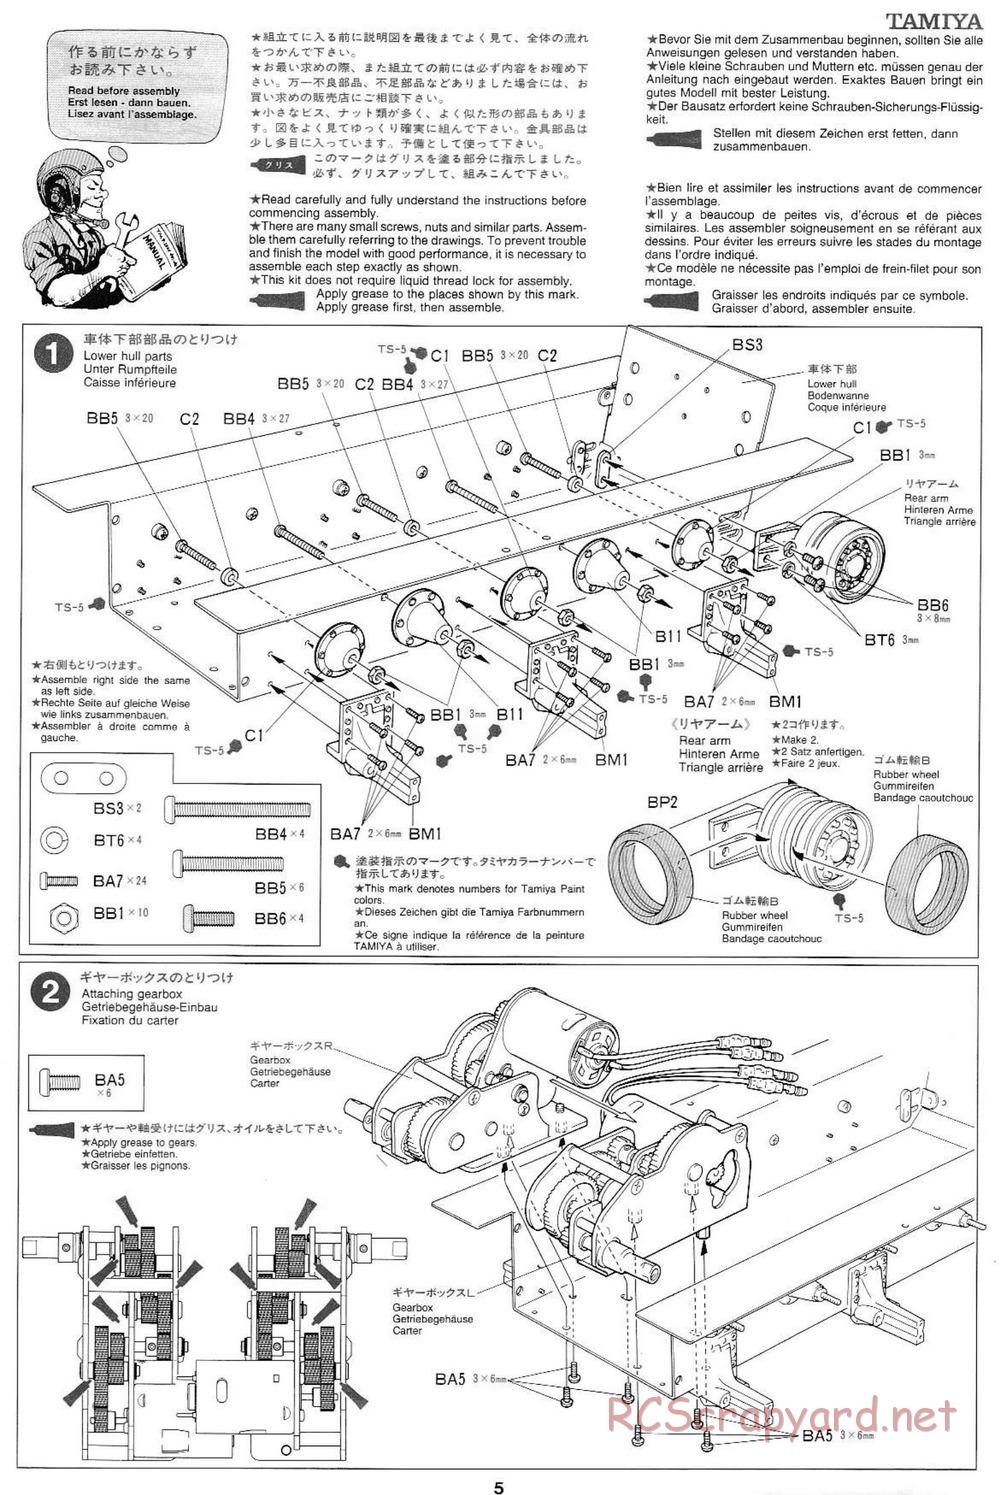 Tamiya - M4 Sherman 105mm Howitzer - 1/16 Scale Chassis - Manual - Page 5